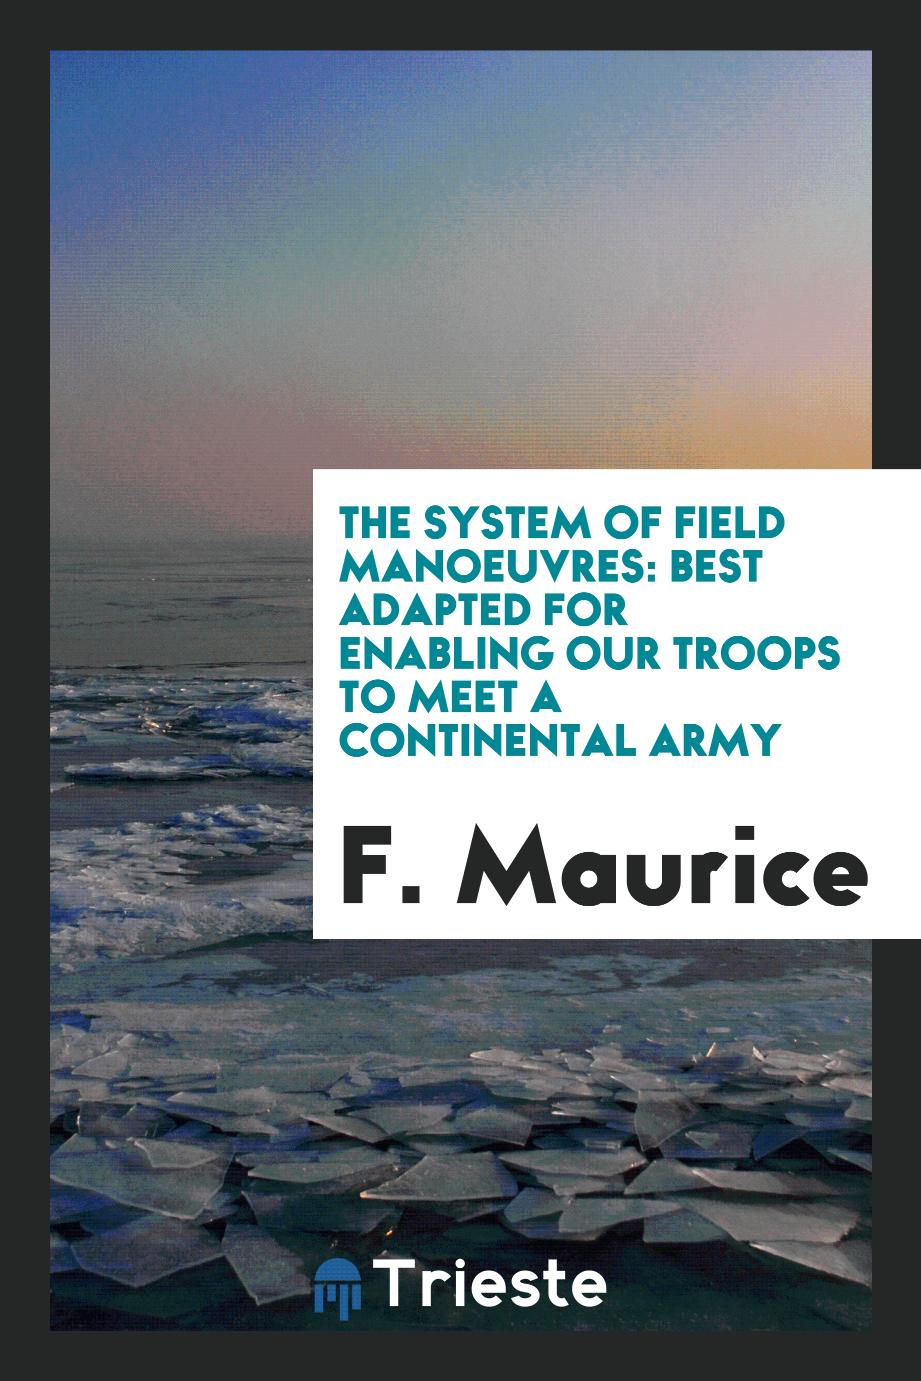 The System of Field Manoeuvres: Best Adapted for Enabling Our Troops to Meet a Continental Army